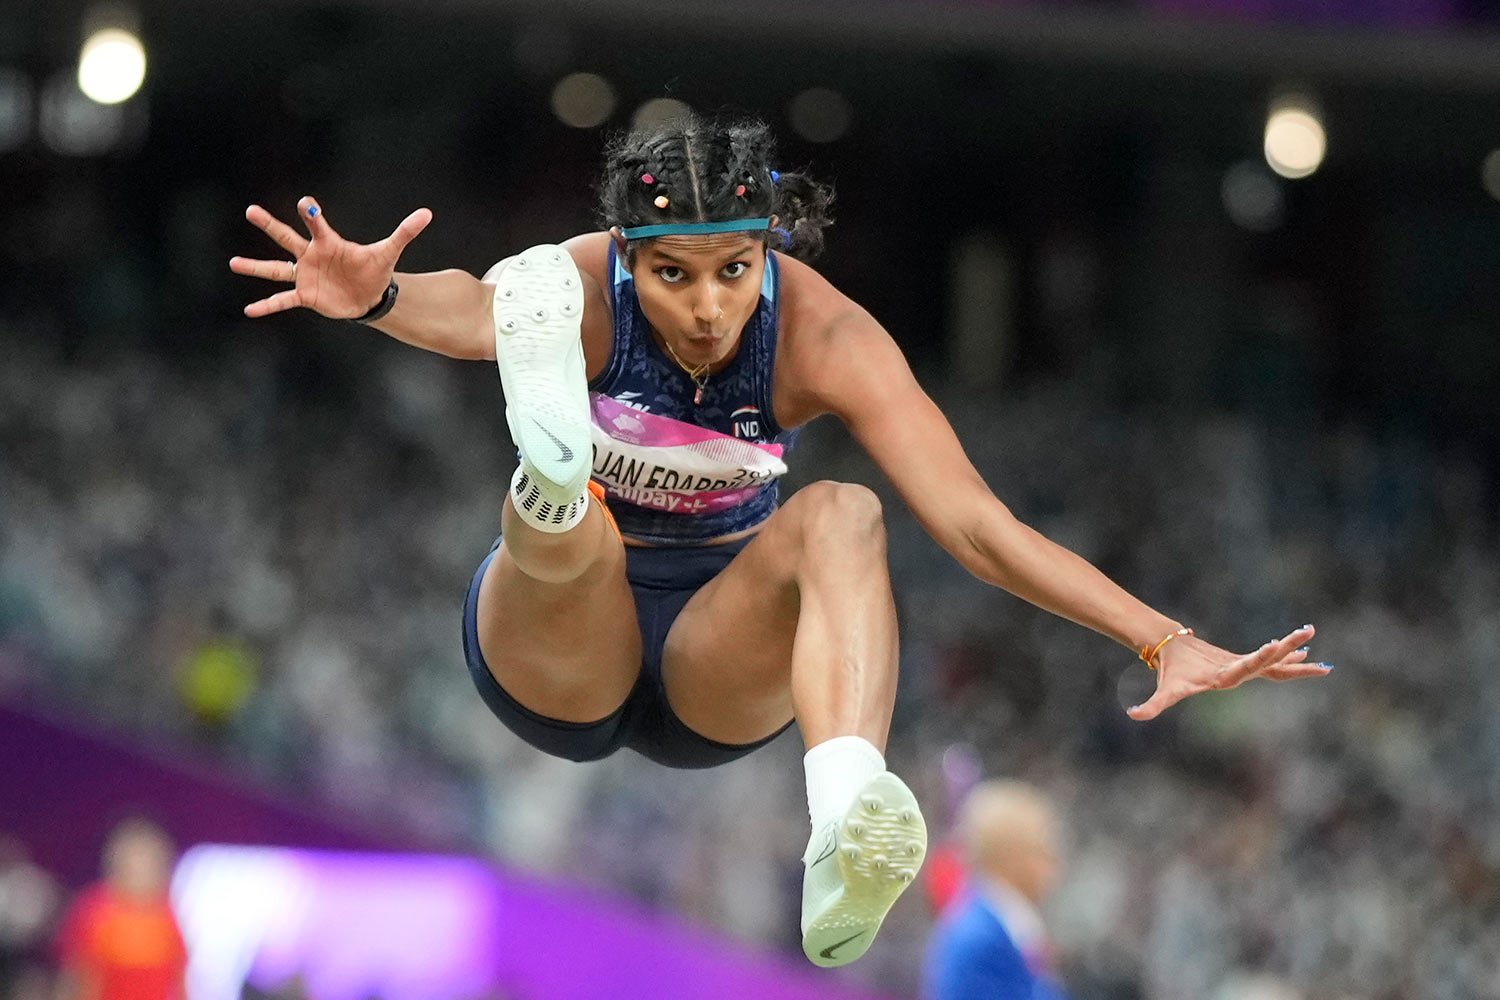  India's Ancy Sojan Edappilly competes during the women's long jump final at the 19th Asian Games in Hangzhou, China, Monday, Oct. 2, 2023. (AP Photo/Lee Jin-man) 